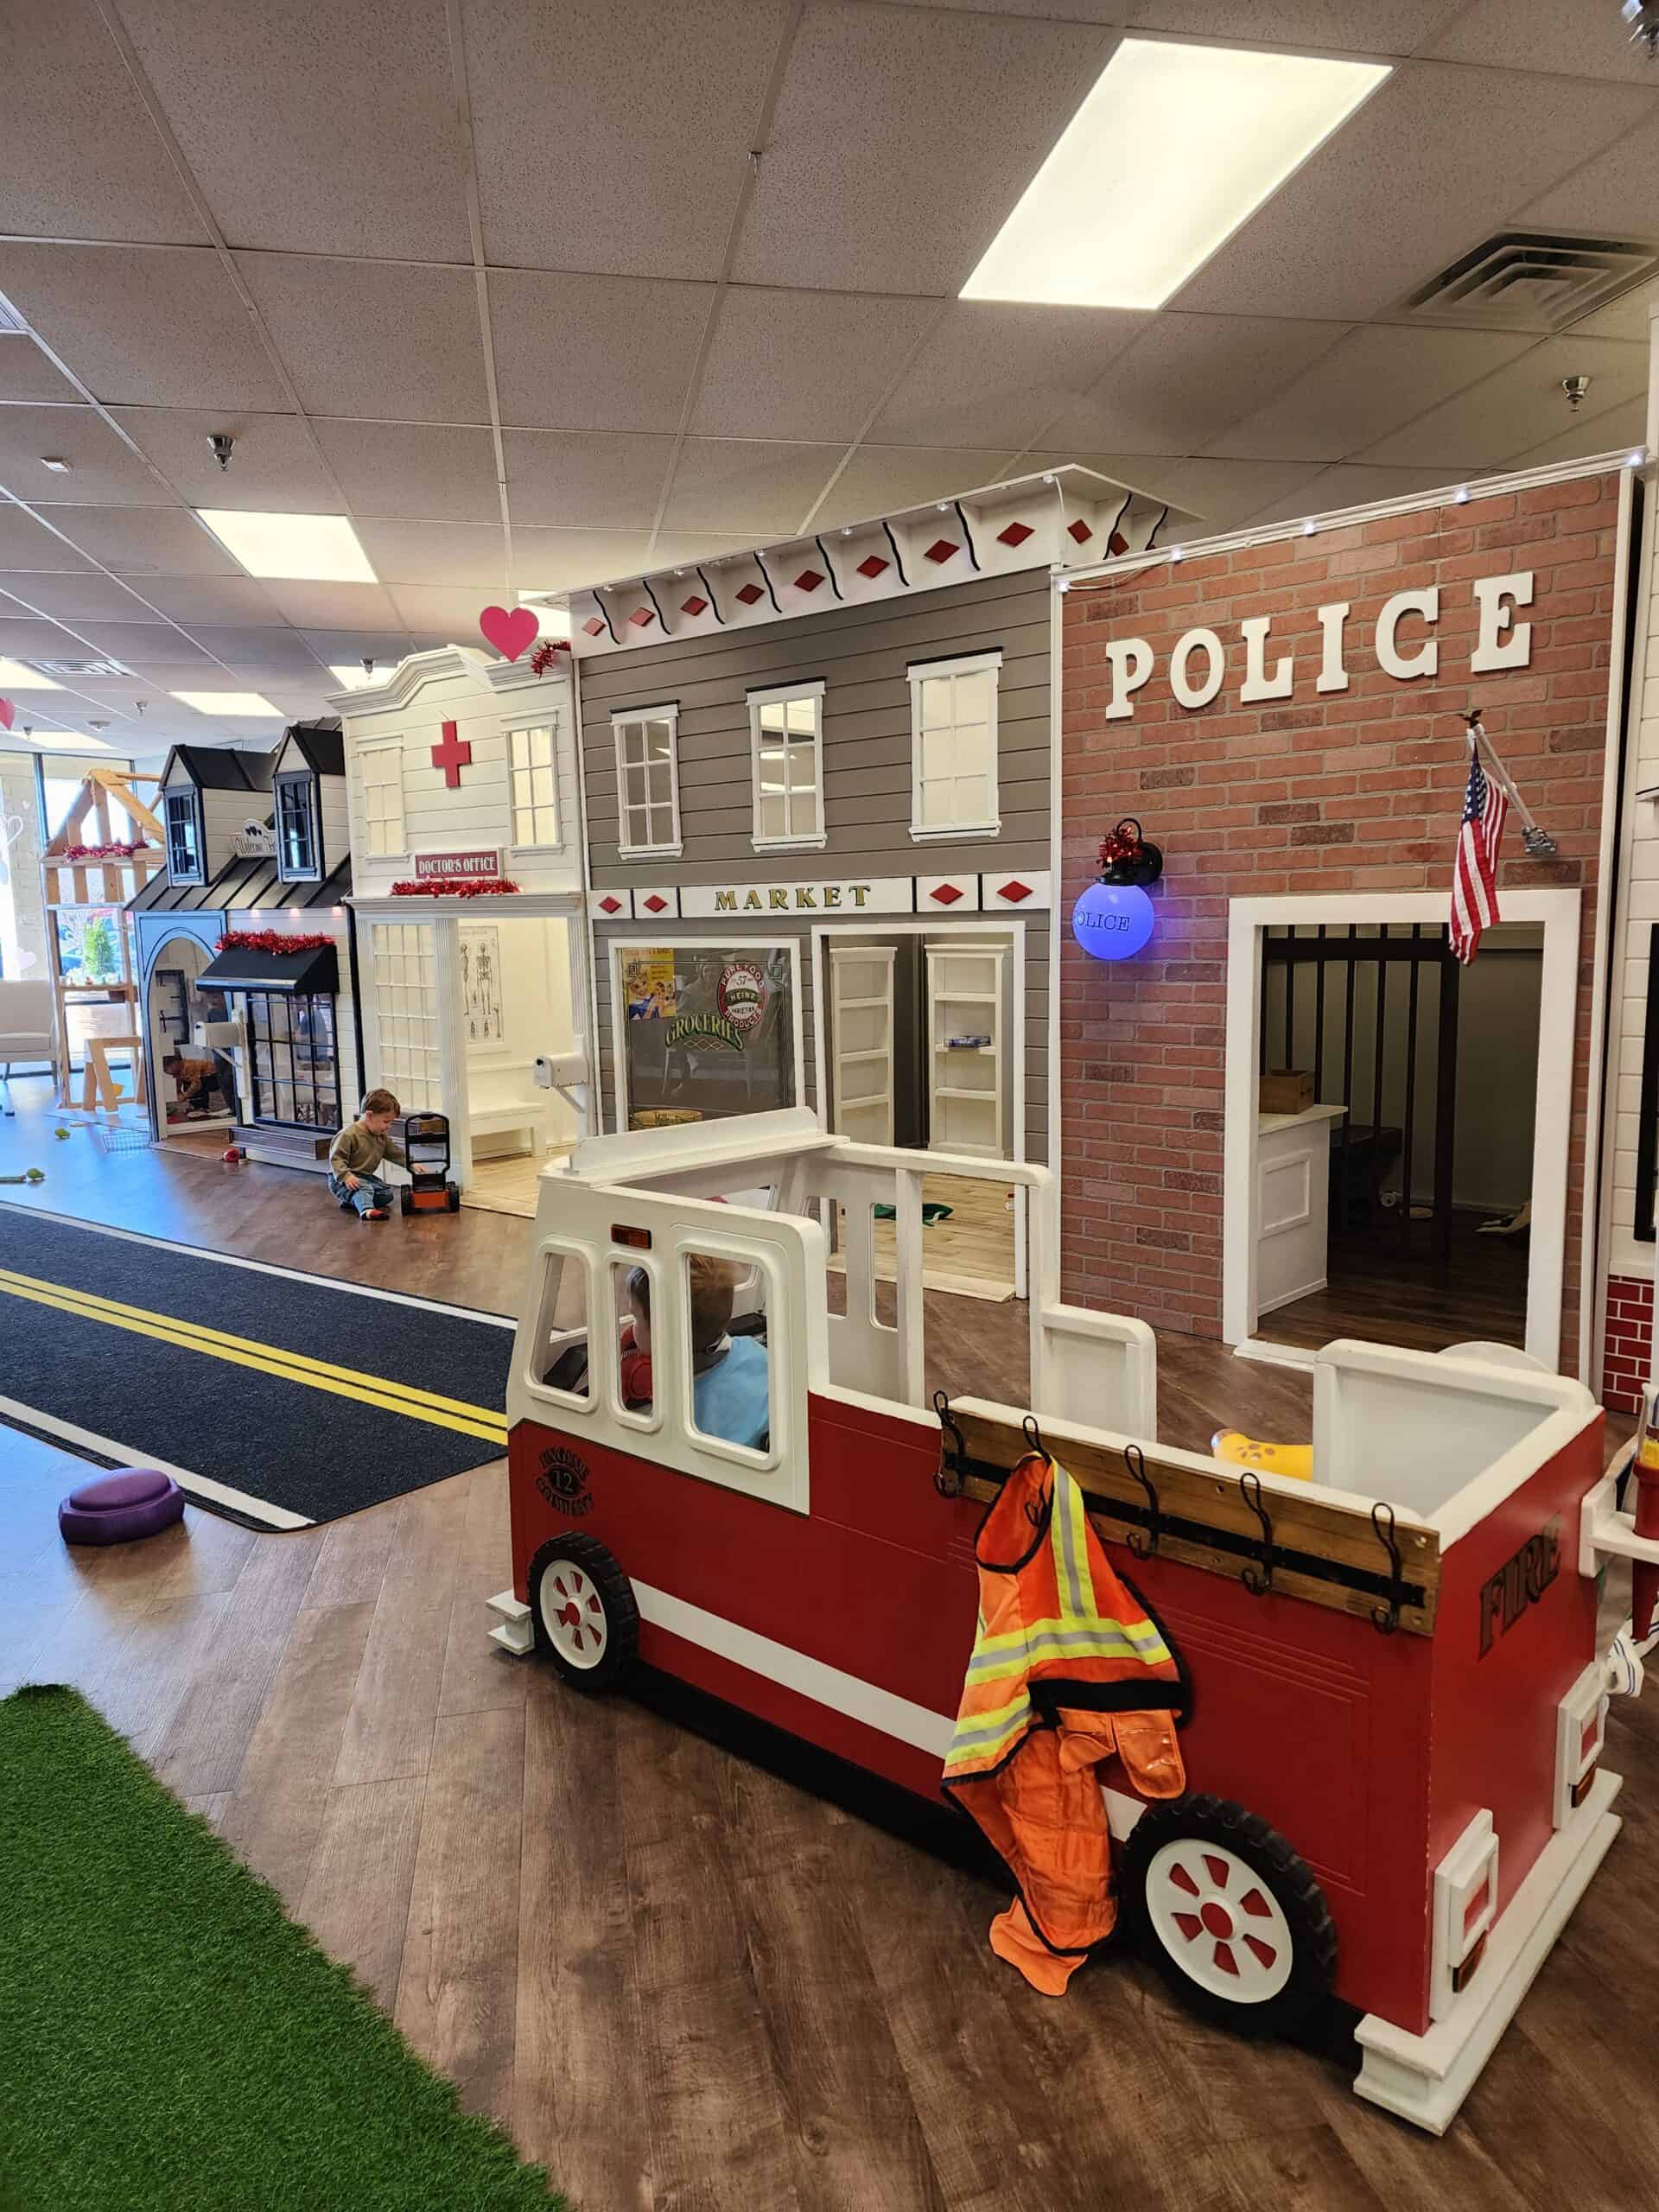 A playful and educational setup for children in an indoor play area, featuring a mini-town with a fire station, police station, and market, complete with a toy fire truck and realistic costumes for imaginative toddler activities.